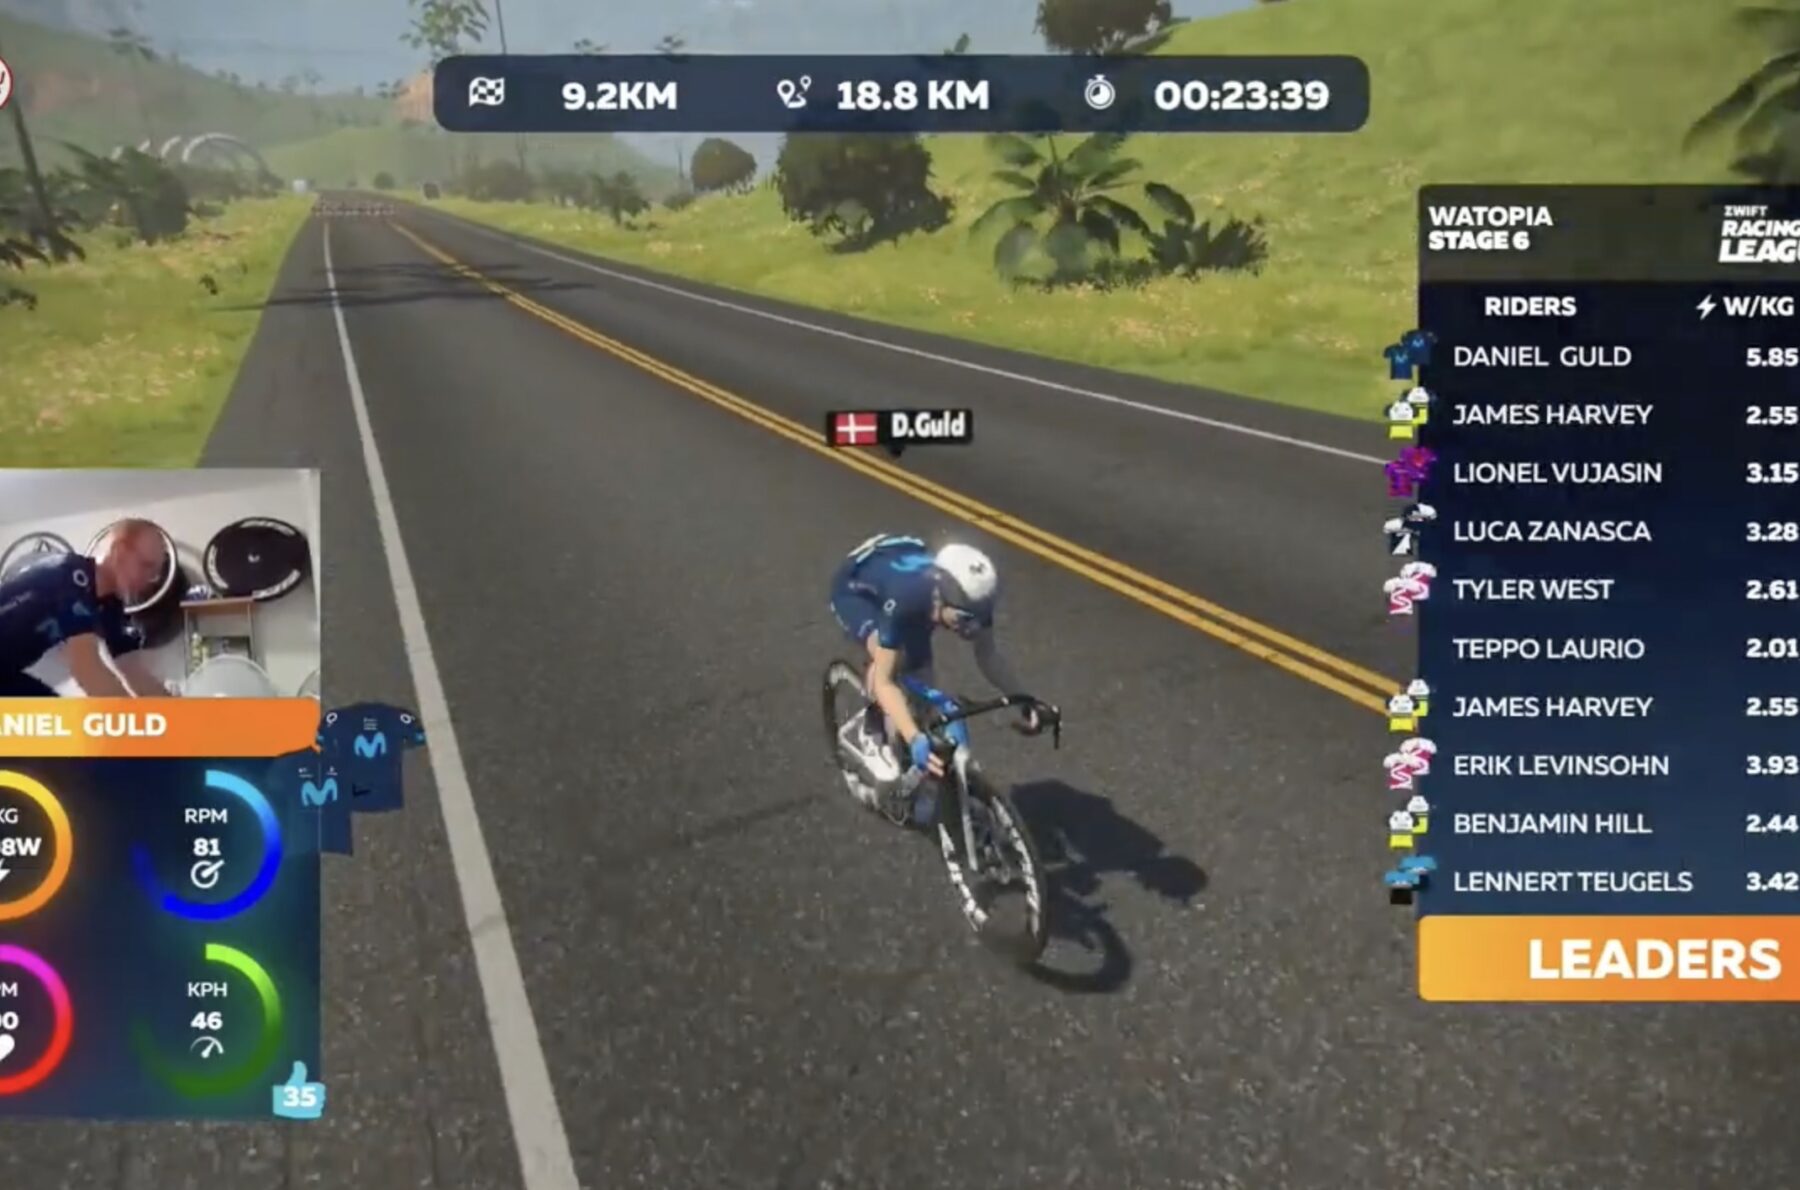 2021-22 Zwift Racing League’s Winter Season comes to its end as Movistar eTeams take 4th, 8th overall